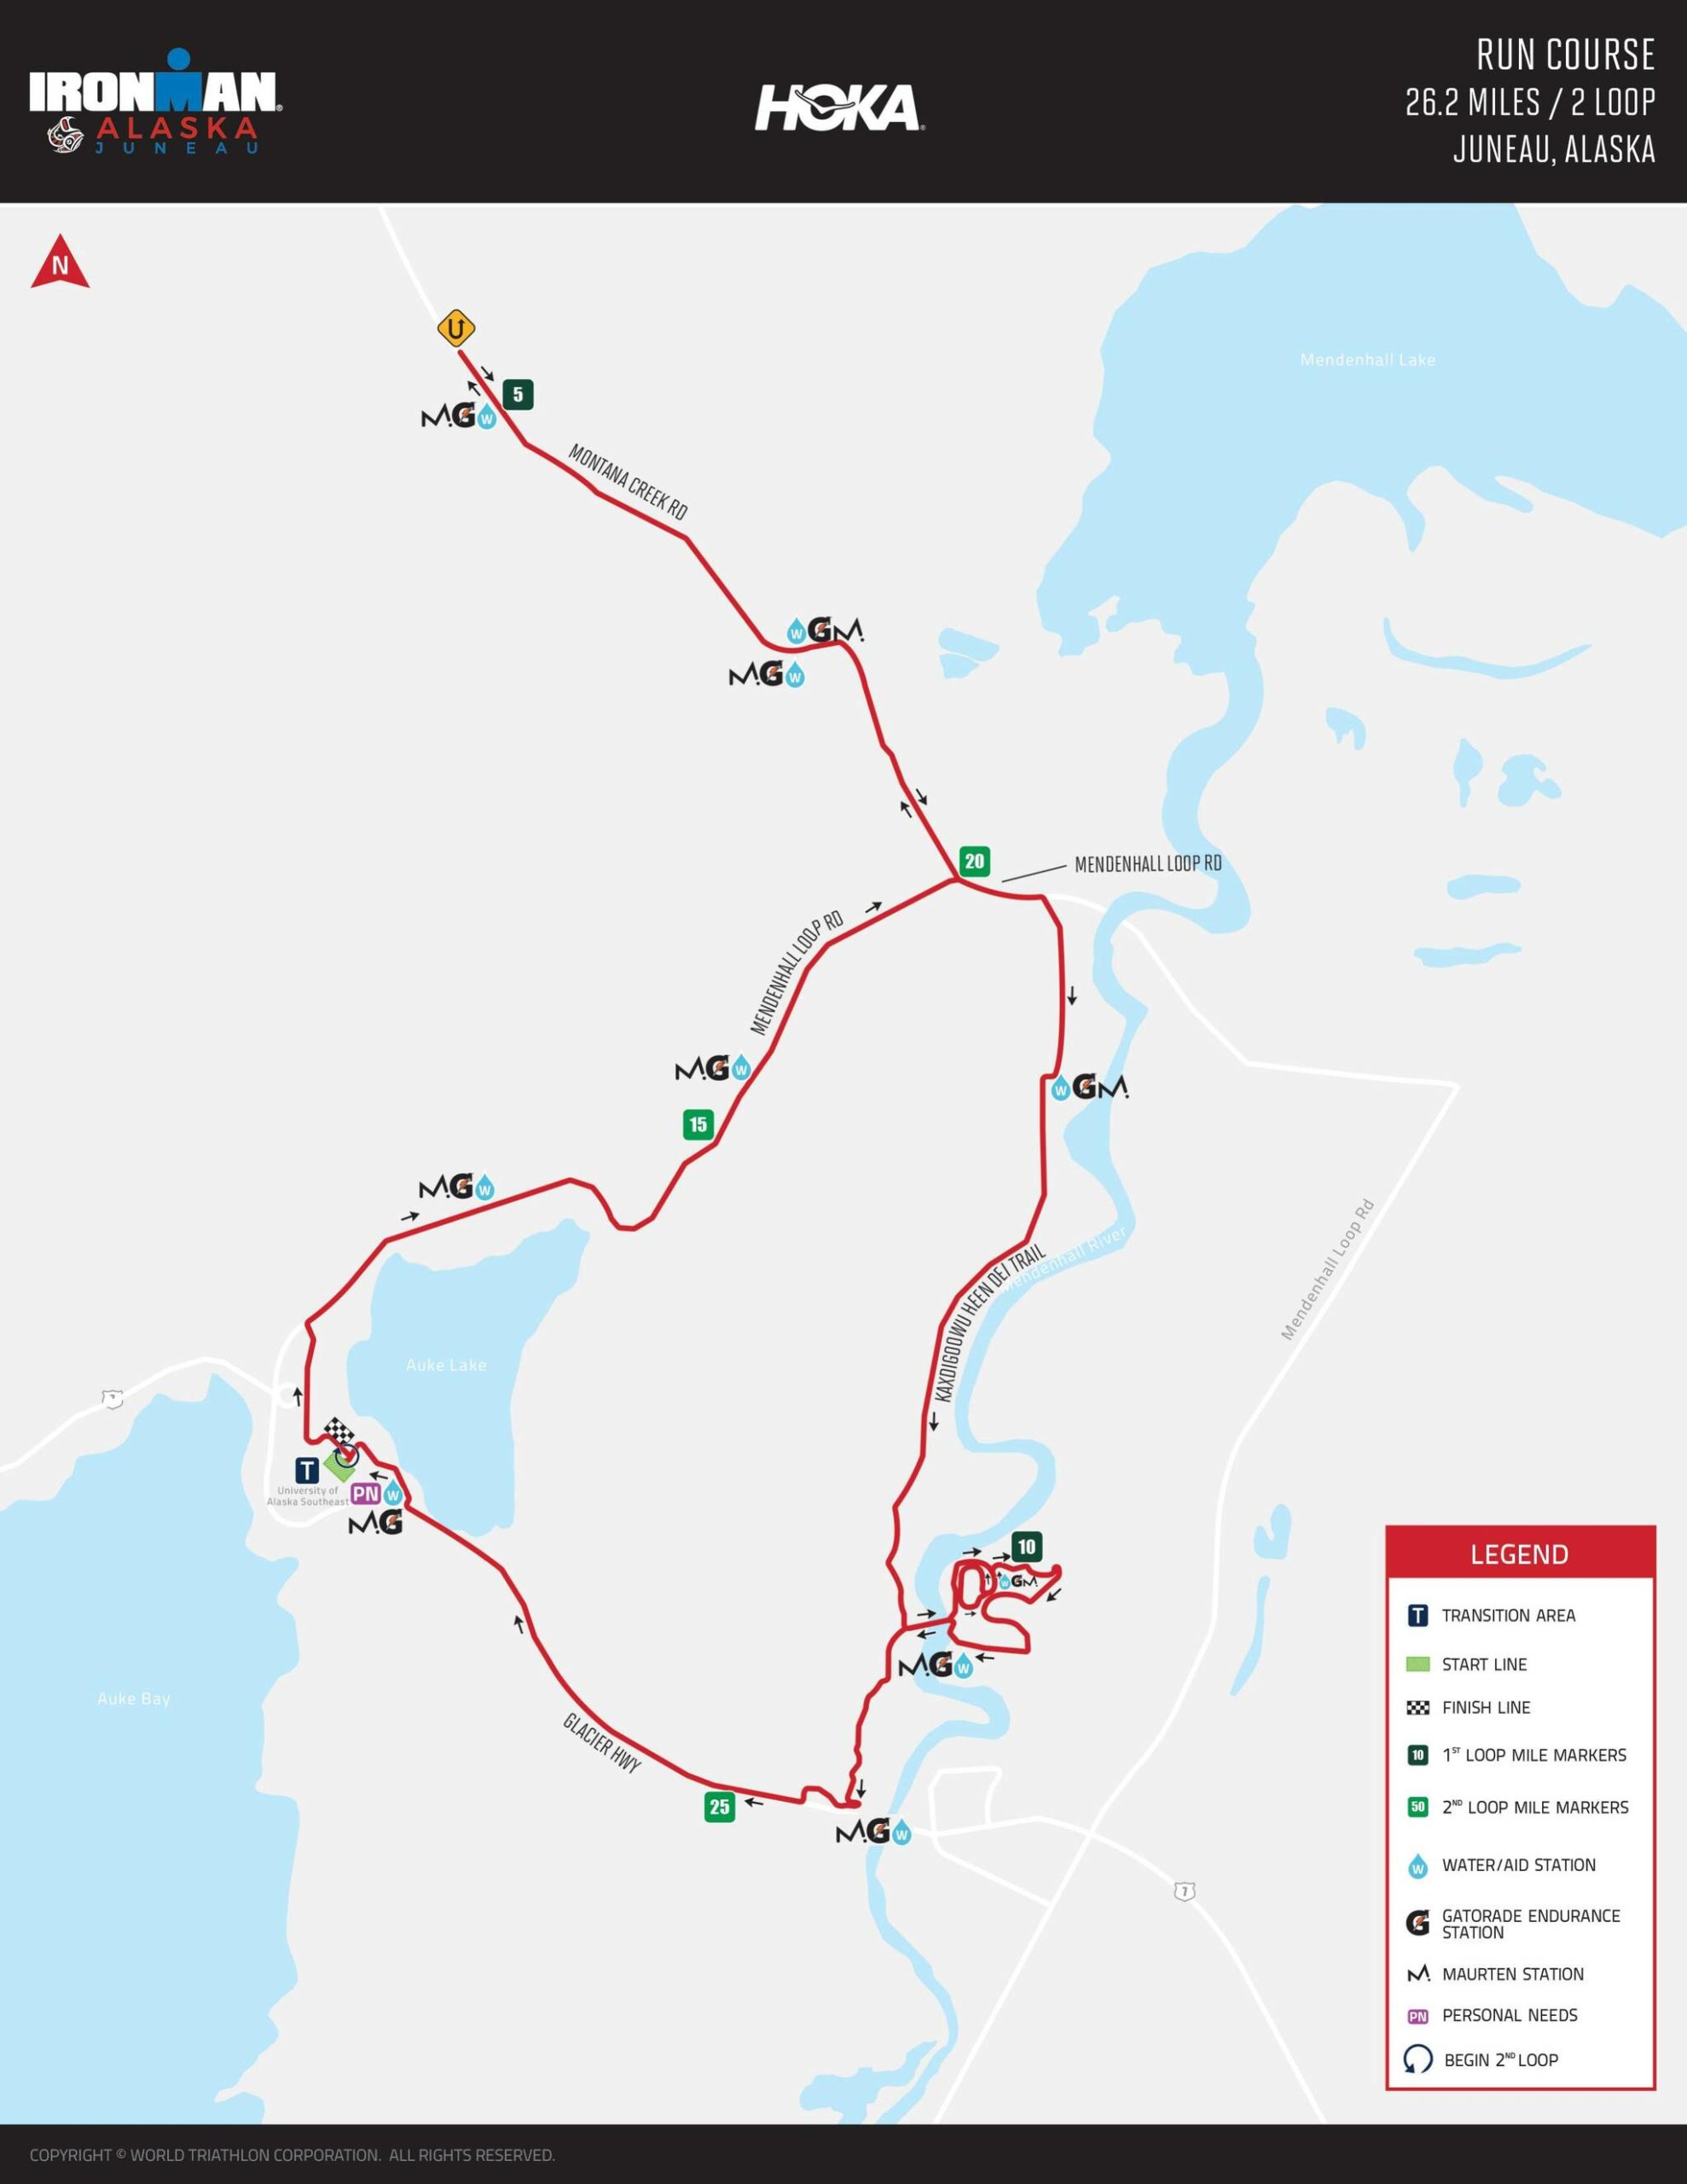 Once athletes jump off their bikes at the University of Alaska Southeast, they will proceed to run the 26.2-mile run course which loops and finishes at the same point as the start. (Courtesy / Travel Juneau)